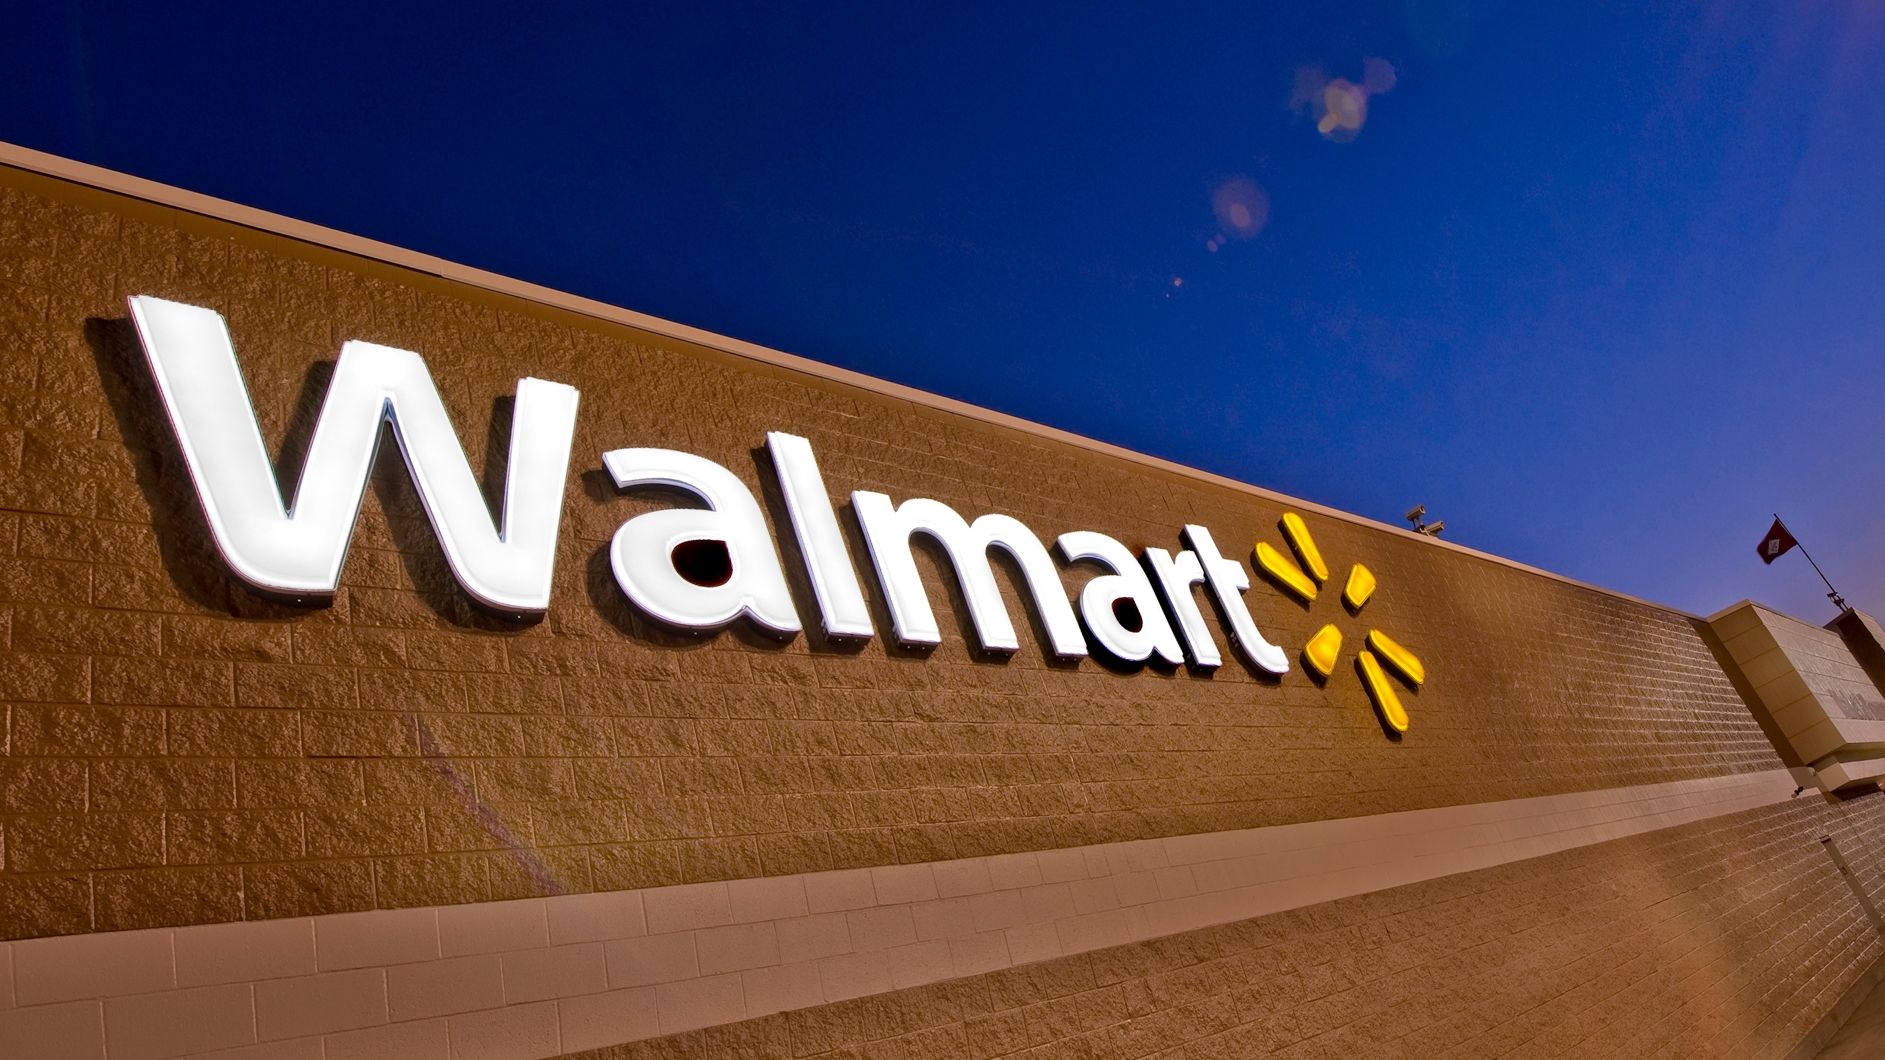 Walmart is closing half of its stores in the big city in the United States, citing large financial losses